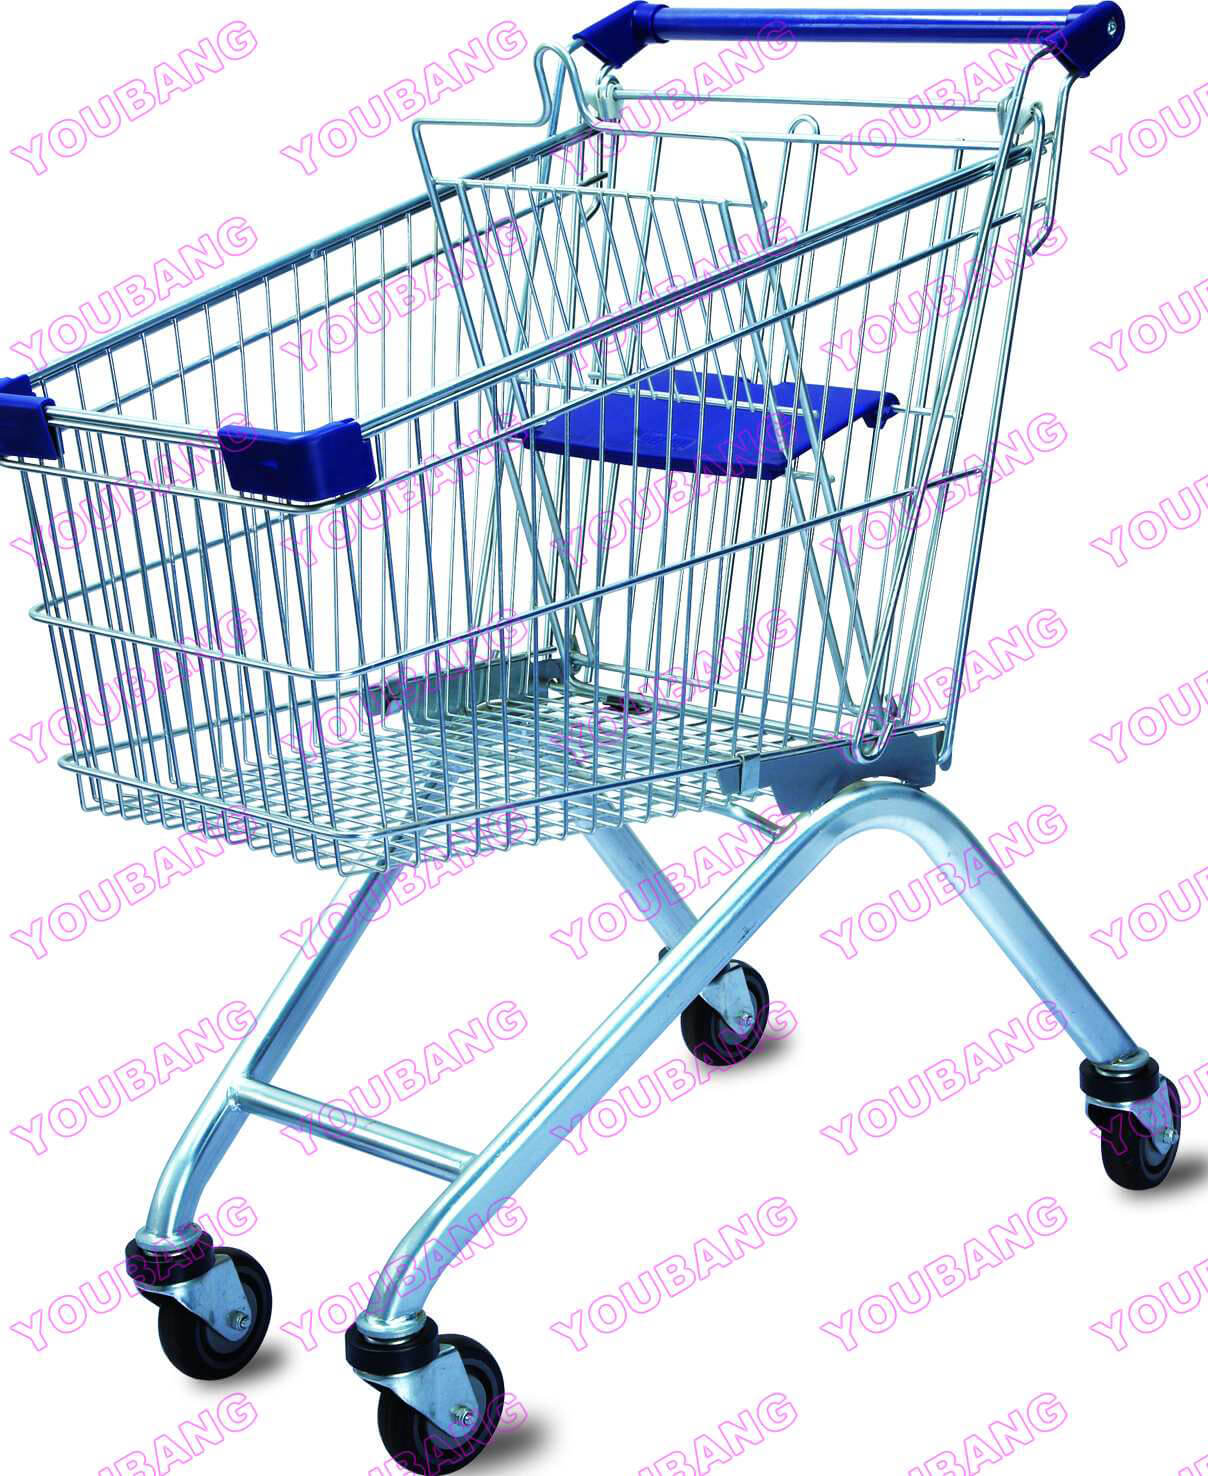 Supermarket shopping cart with 5inch Castor